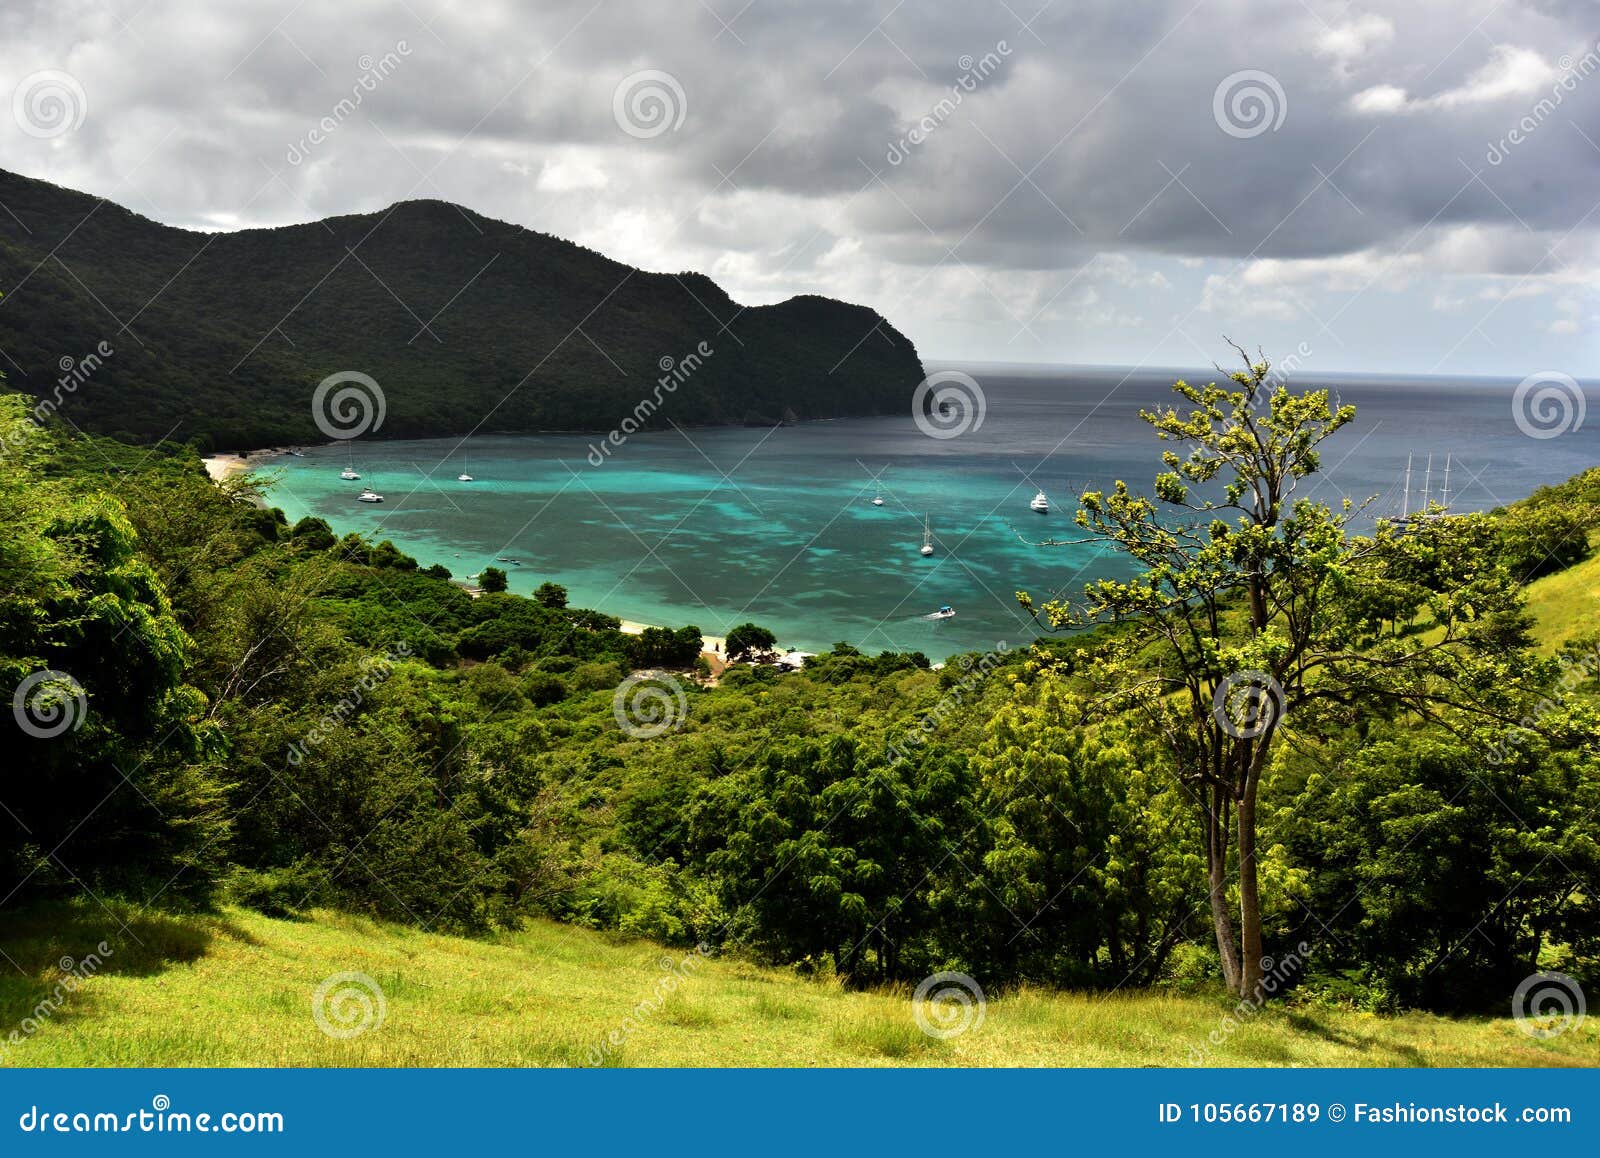 Top View from Tropical Island with Perfect Beach. Stock Image - Image ...